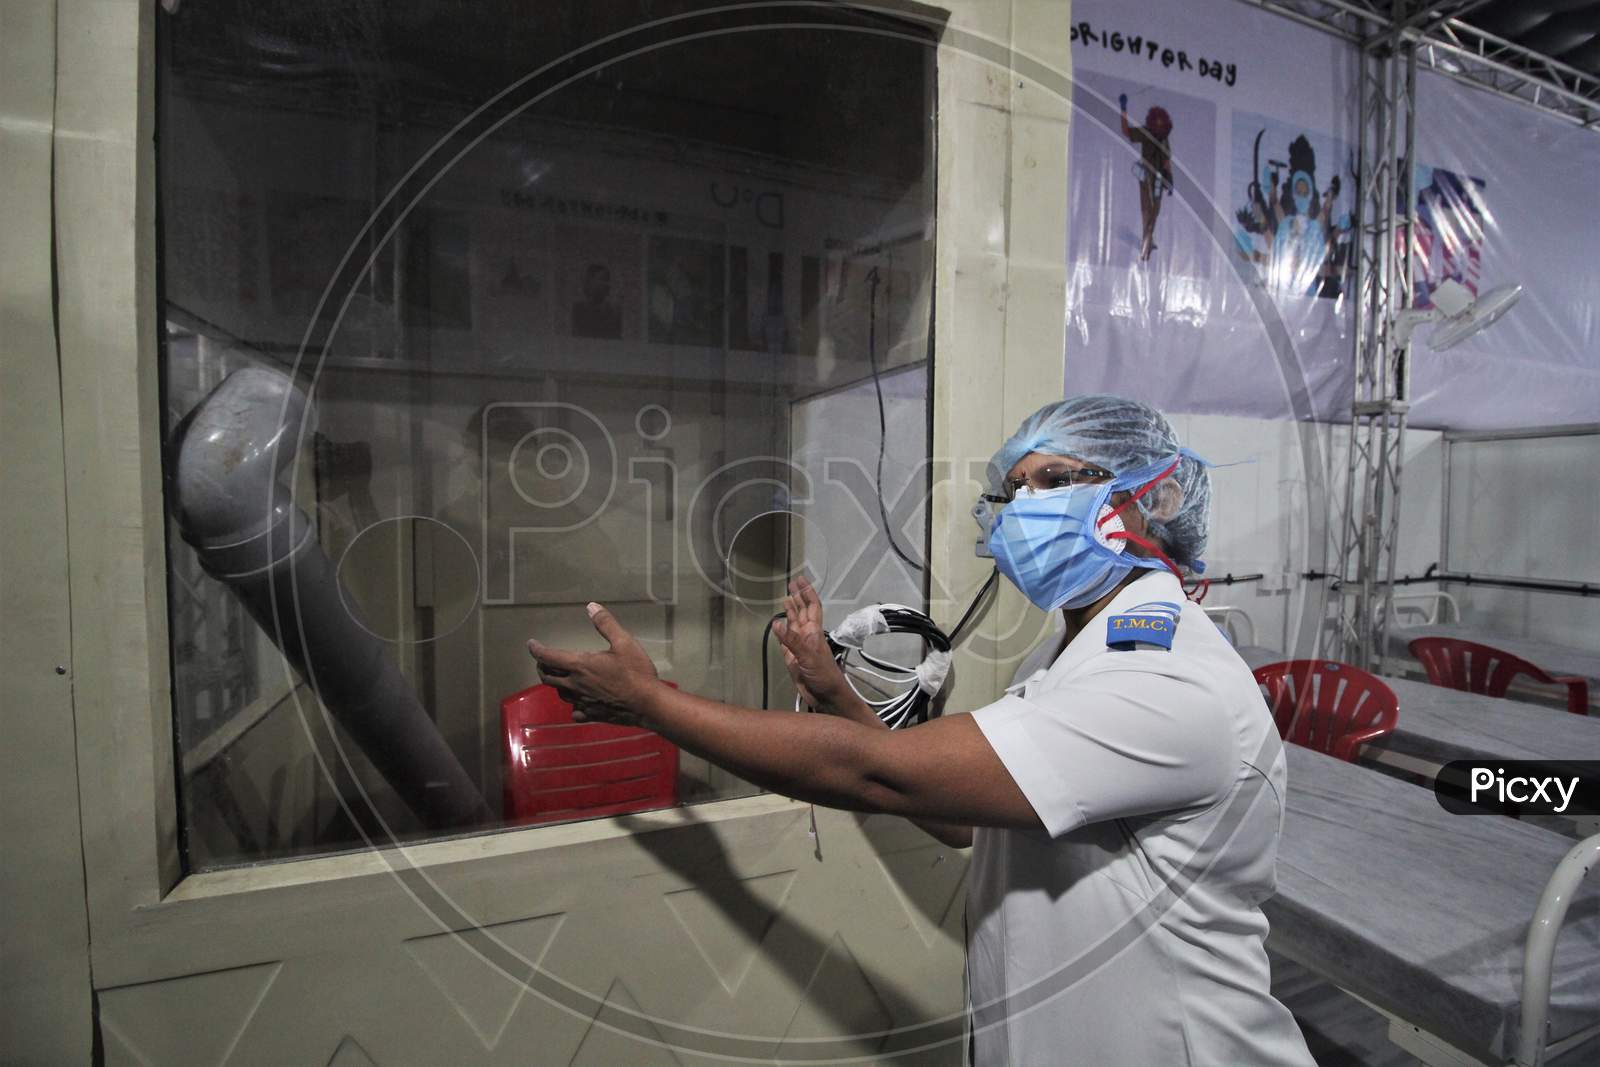 A nurse shows the swab test booth inside the newly inaugurated temporary facility created to screen cancer patients for covid 19, in Mumbai, India on July 30, 2020.